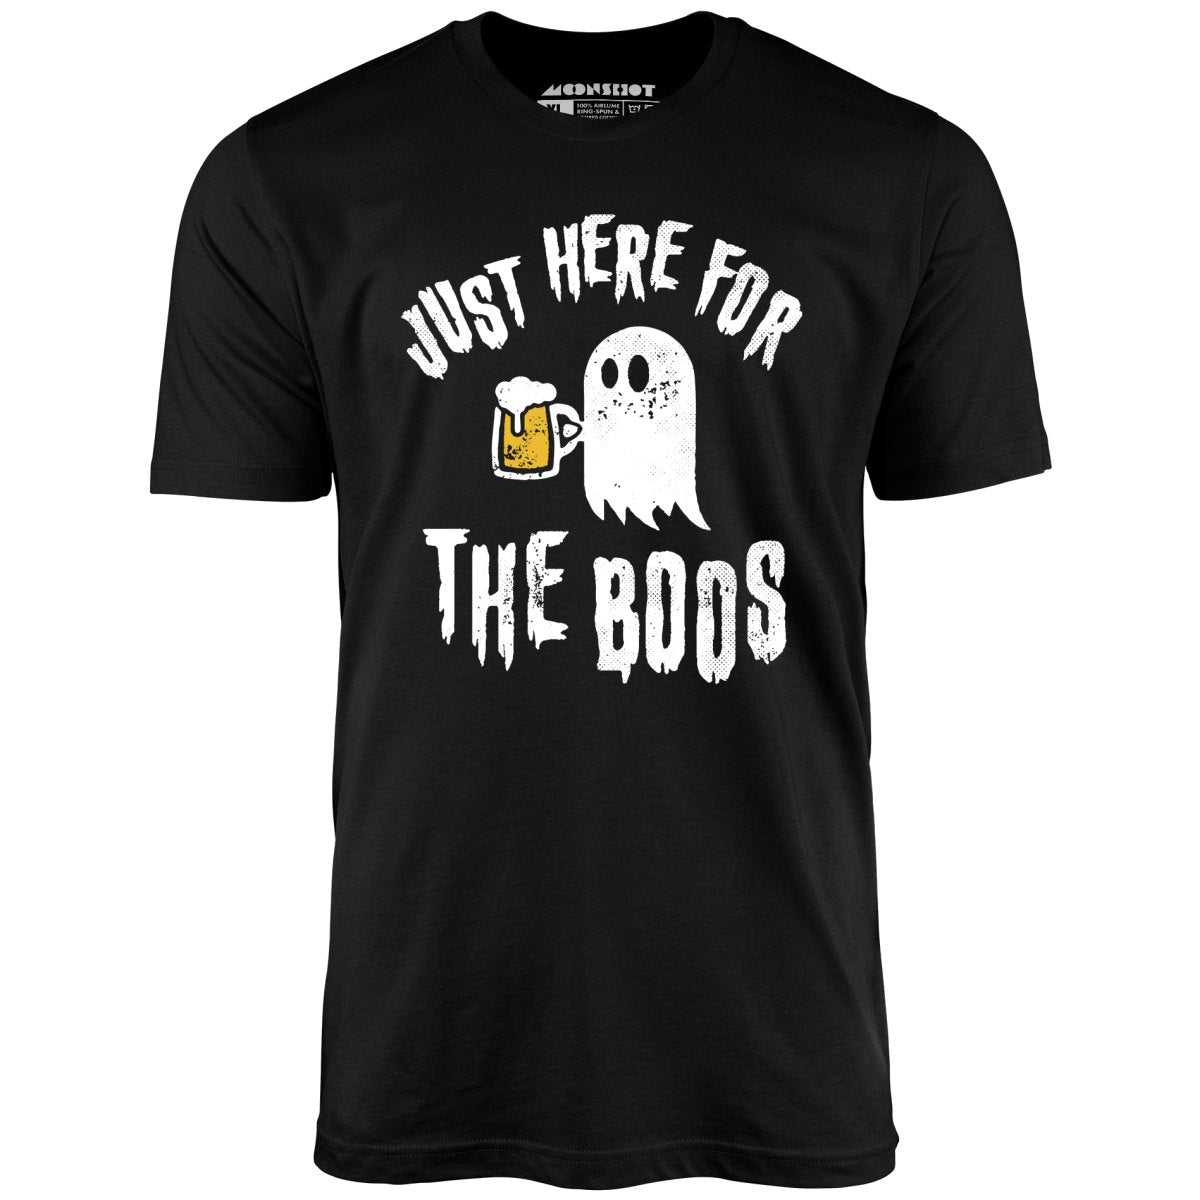 Just Here for the Boos - Unisex T-Shirt